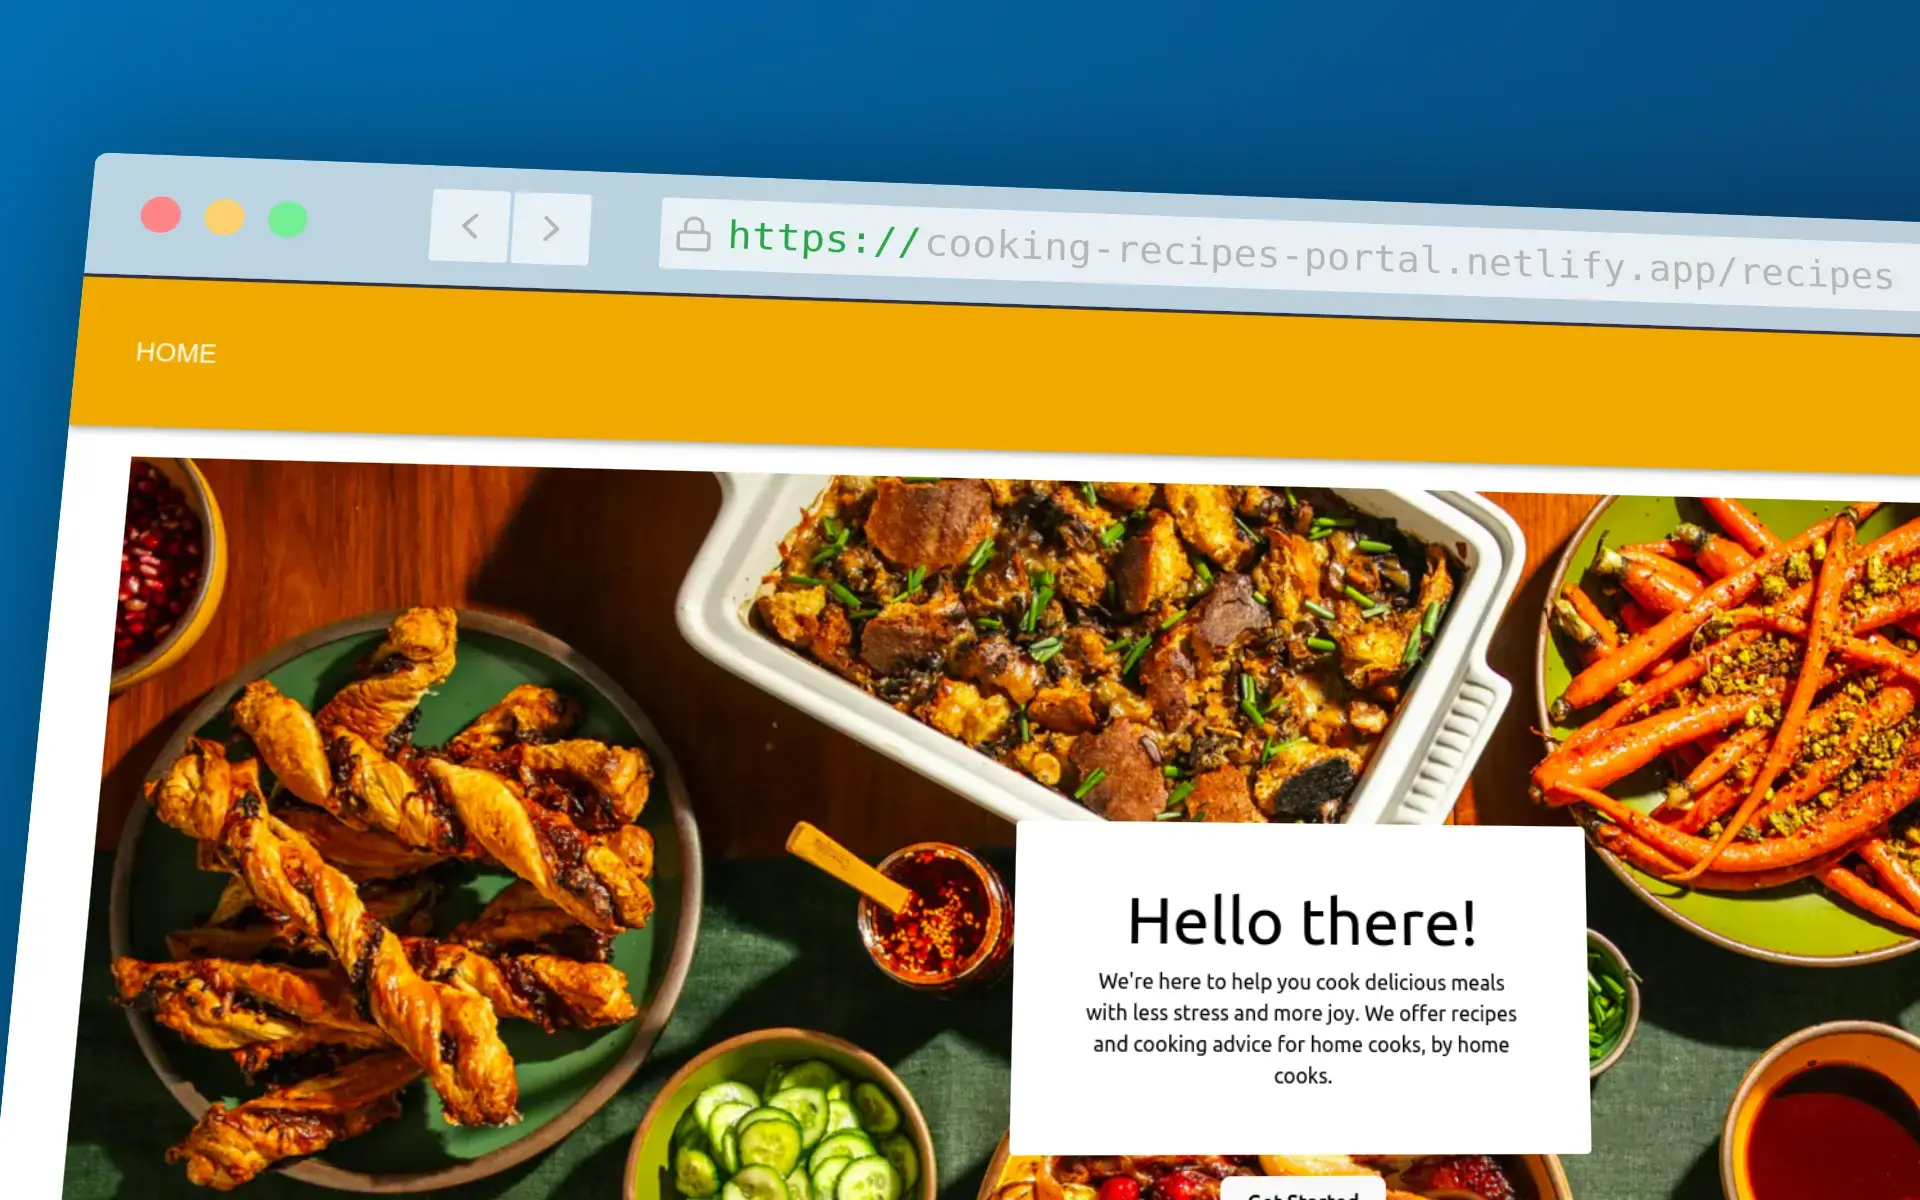 Homepage of the 'Cooking Recipes Portal' website with vibrant images of various dishes, including chicken wings, roasted vegetables, and a greeting message promoting home cooking.